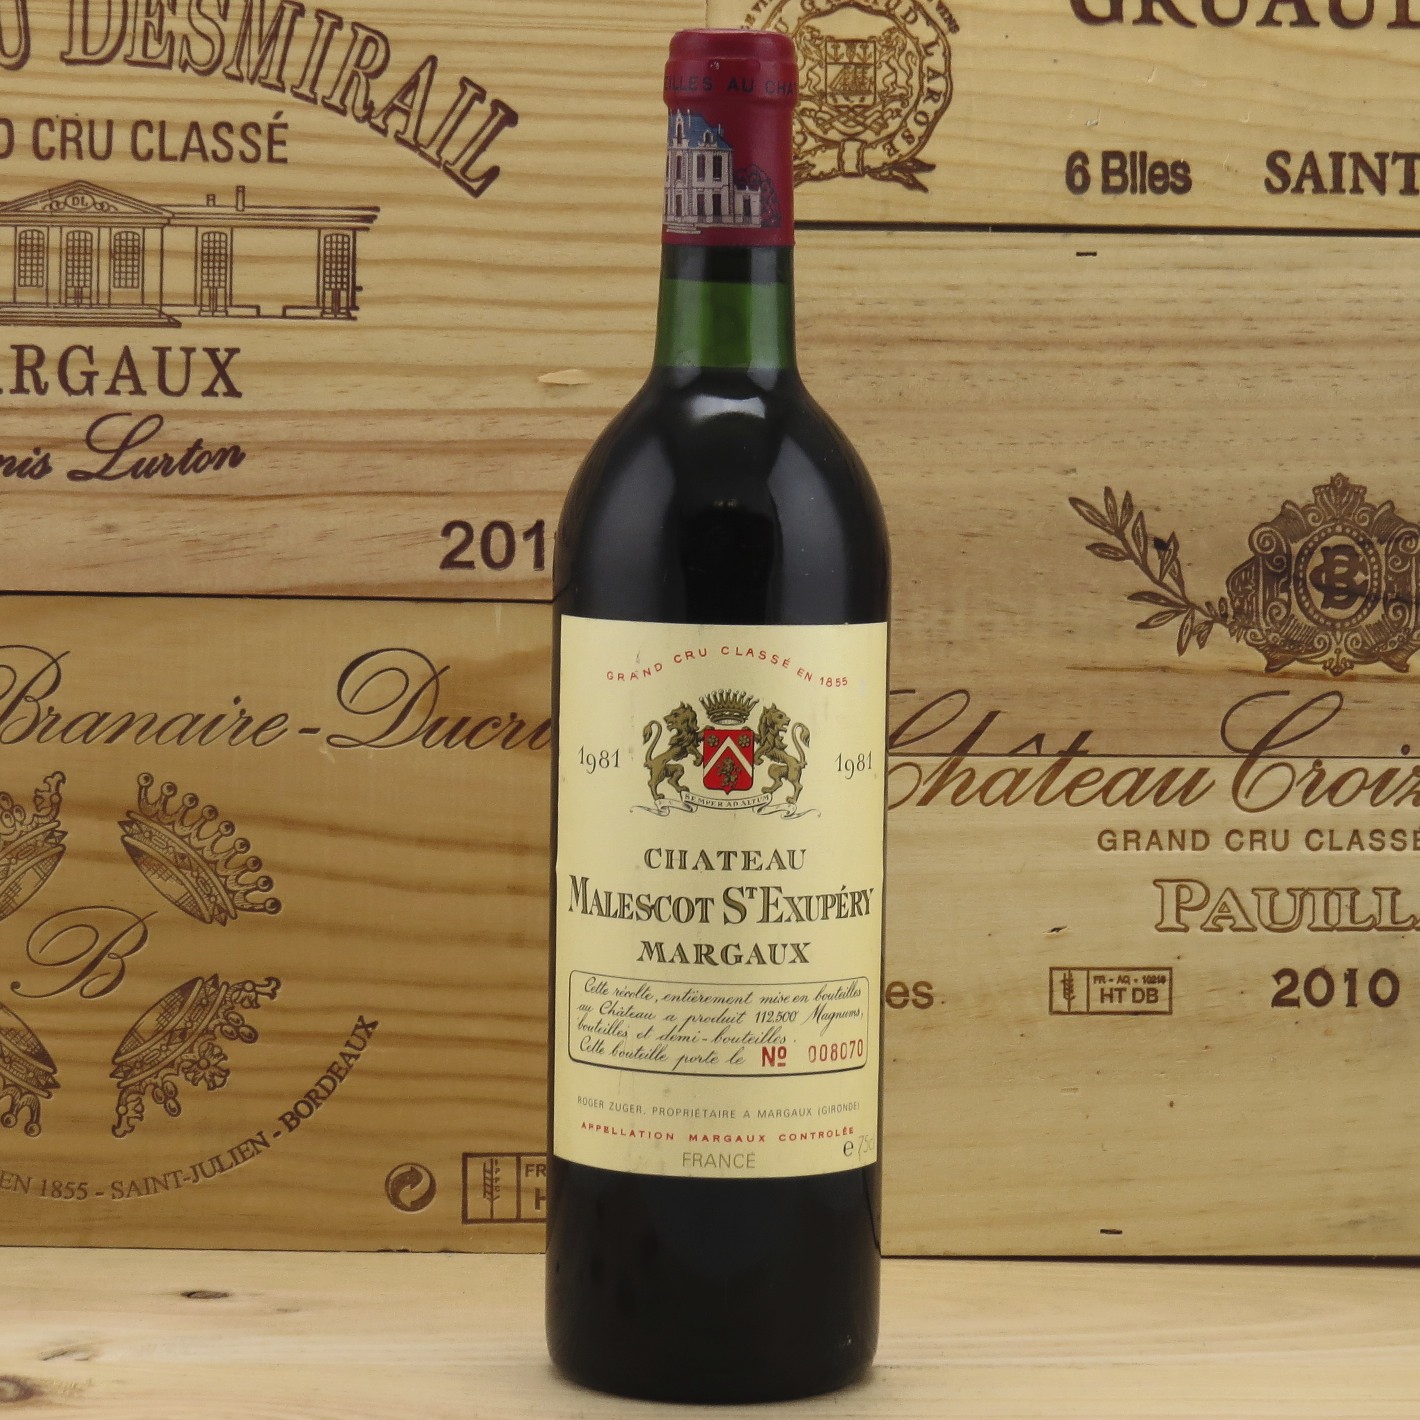 1981 Chateau Malescot St. Exupery